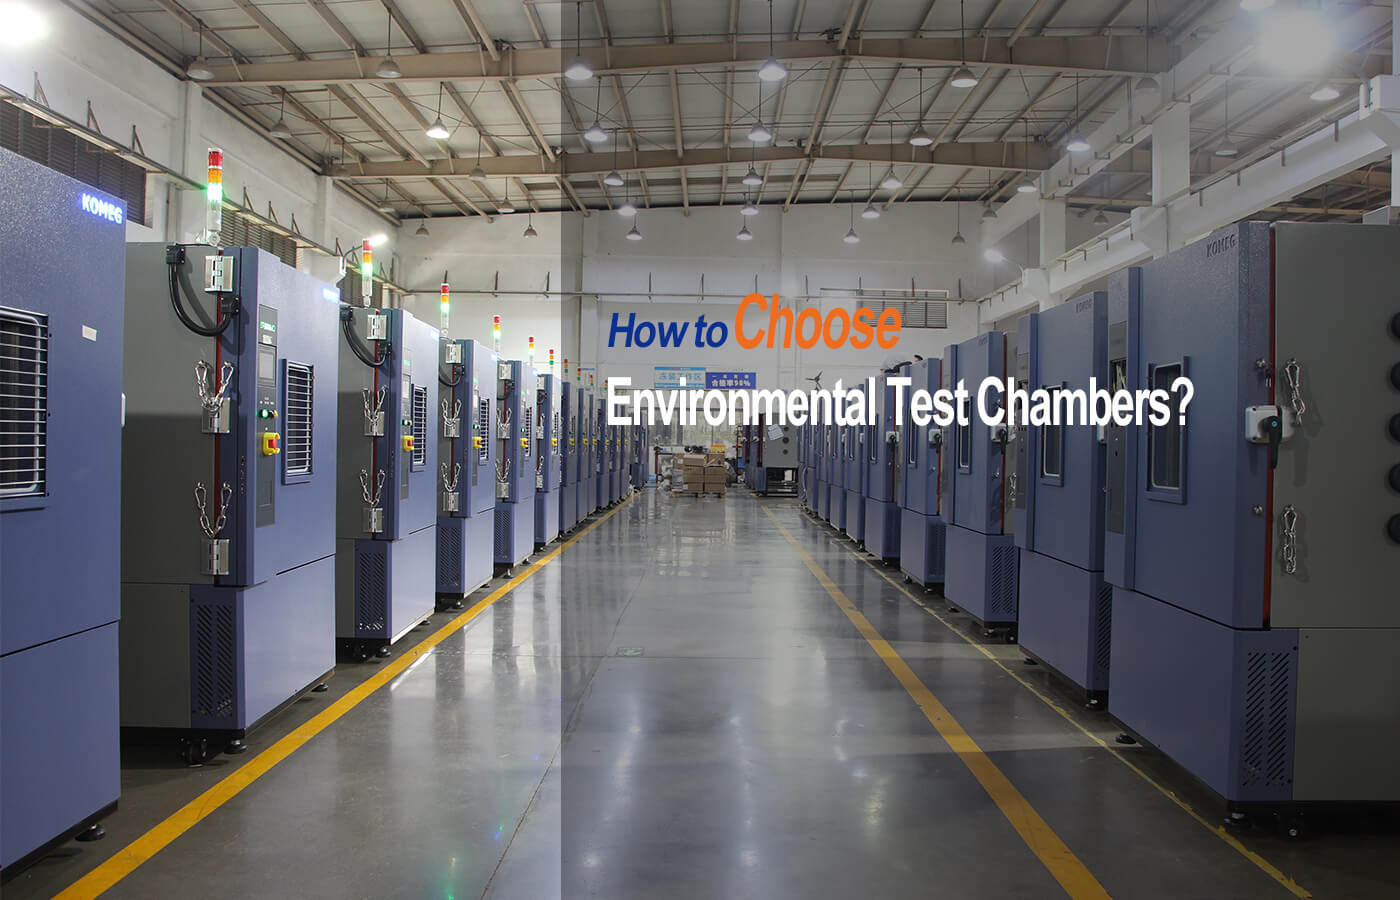 HOW TO CHOOSE ENVIRONMENTAL TEST CHAMBER